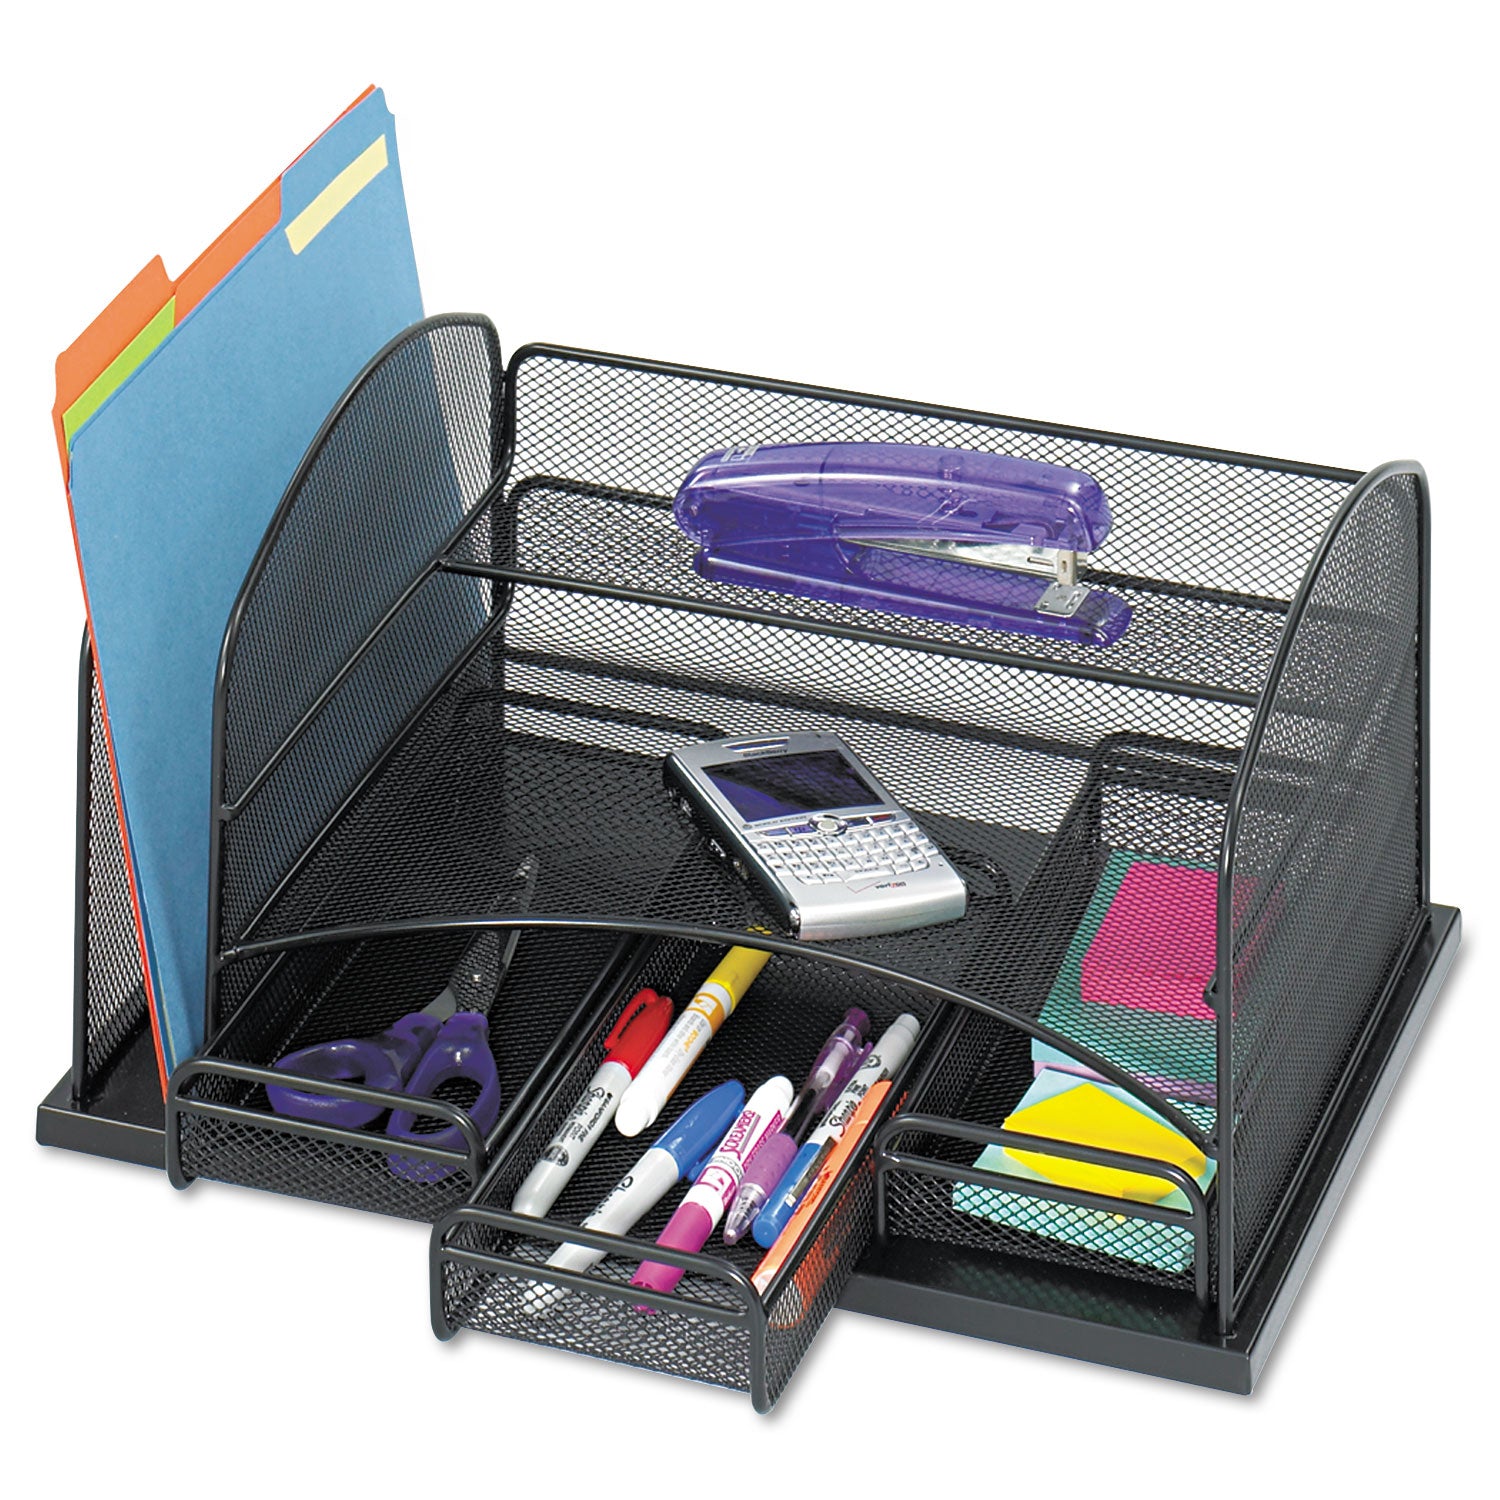 Onyx Organizer with 3 Drawers, 6 Compartments, Steel, 16 x 11.5 x 8.25, Black - 